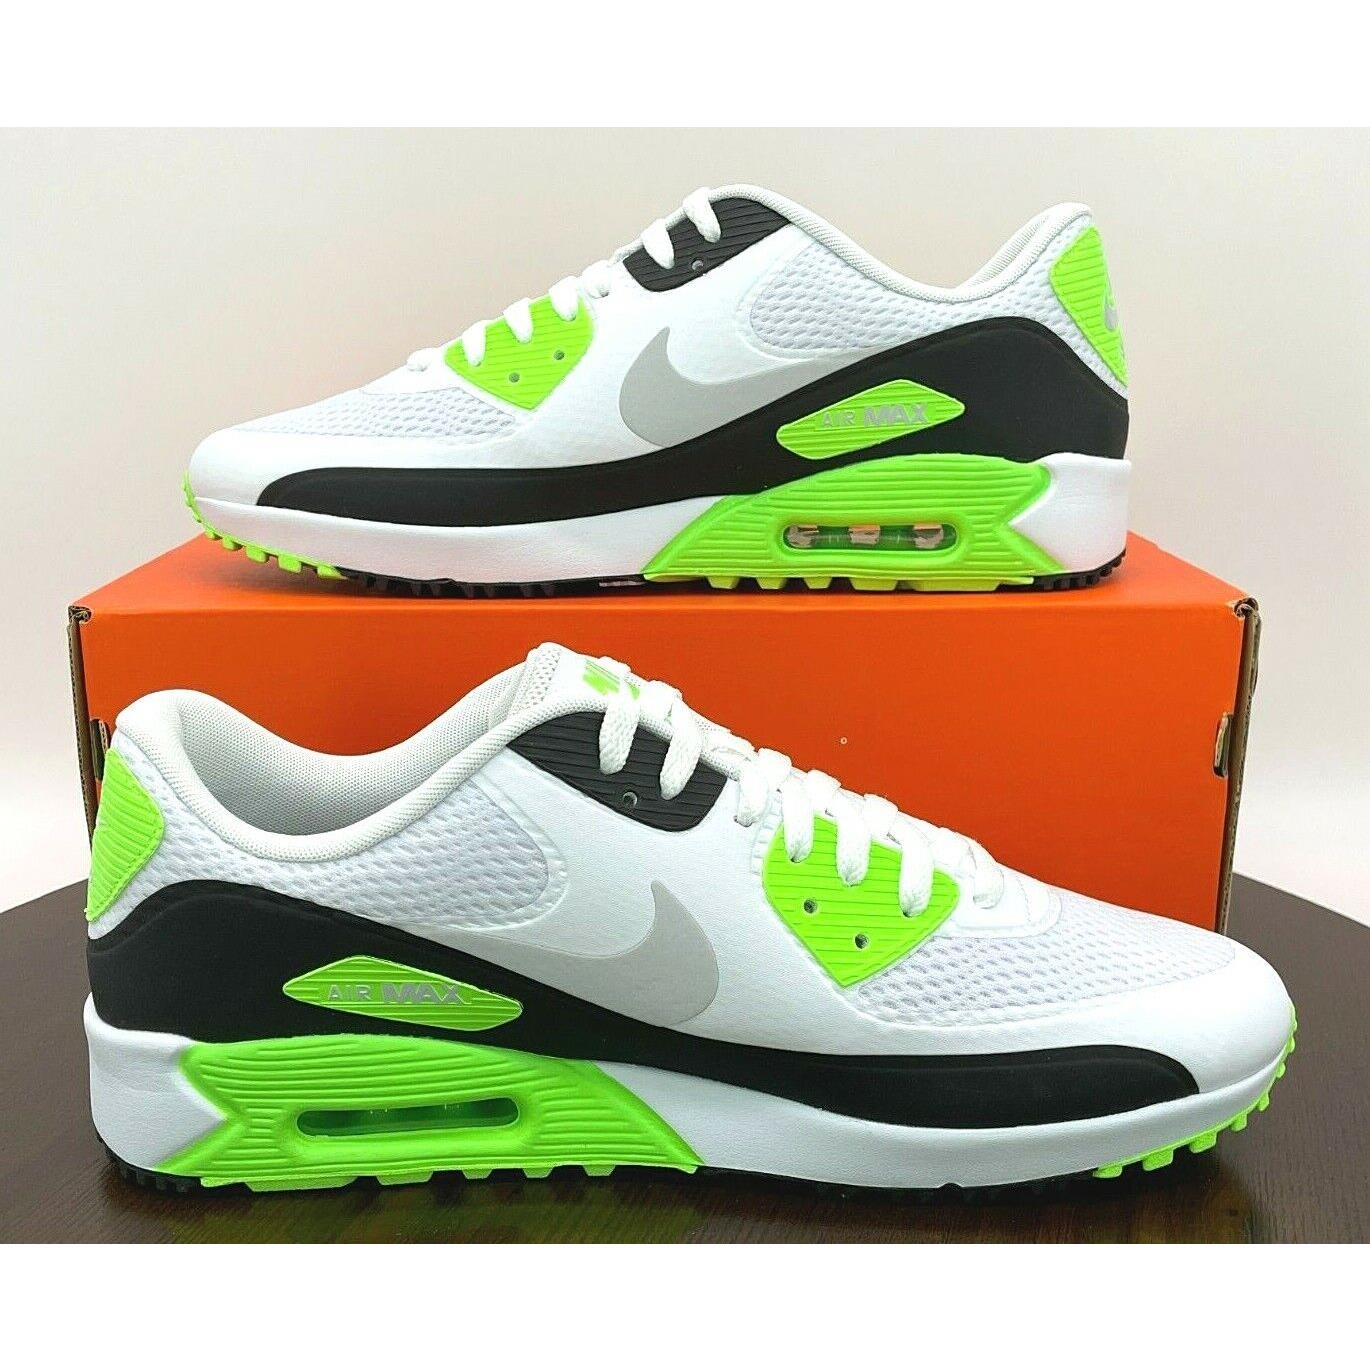 Size 13 Nike Air Max 90 G Mens Golf Shoes White/grey/black/lime CU9978 100  | 883212108203 - Nike shoes Air Max - White/Grey/Black/Lime | SporTipTop